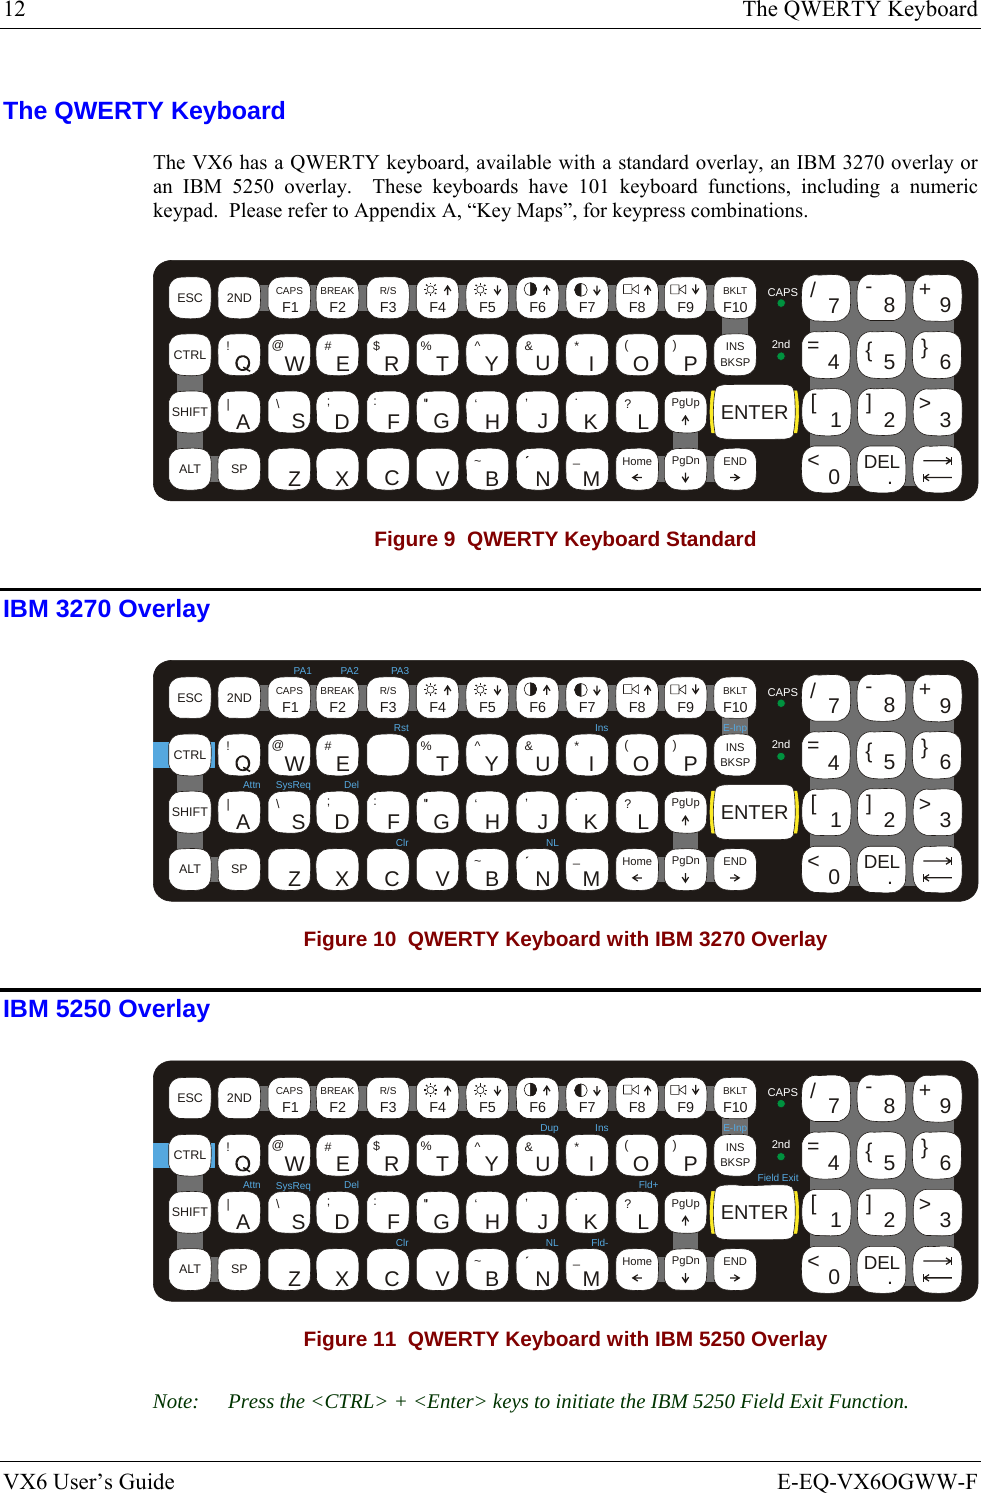 12  The QWERTY Keyboard VX6 User’s Guide  E-EQ-VX6OGWW-F The QWERTY Keyboard The VX6 has a QWERTY keyboard, available with a standard overlay, an IBM 3270 overlay or an IBM 5250 overlay.  These keyboards have 101 keyboard functions, including a numeric keypad.  Please refer to Appendix A, “Key Maps”, for keypress combinations.  ESCSHIFT2NDALT SPF1 F2 F3 F4 F5 F6 F7 F8 F9CAPS BREAK R/SBCMNADFGHJKLSVXZ@#$% ^&amp;*()F10BKLTINSBKSPEIOPRTUWYCTRL !|\ :; ‘,.?~_Home ENDENTERPgUpPgDn0.1245/78-+={}[]&gt;&lt;DEL369CAPS2nd Figure 9  QWERTY Keyboard Standard IBM 3270 Overlay  ESCSHIFT2NDALT SPF1 F2 F3 F4 F5 F6 F7 F8 F9CAPS BREAK R/SBCMNADFGHJKLSVXZ@#$%^&amp;*()F10BKLTINSBKSPEIOPRTUWYCTRL !|\ :; ‘,.?~_Home ENDENTERPgUpPgDn0.1245/78-+={}[]&gt;&lt;DEL369Attn SysReq DelClr NLIns E-InpCAPS2ndRstPA1 PA2 PA3 Figure 10  QWERTY Keyboard with IBM 3270 Overlay IBM 5250 Overlay  ESCSHIFT2NDALT SPF1 F2 F3 F4 F5 F6 F7 F8 F9CAPS BREAK R/SBCMNADFGHJKLSVXZ@#$%^&amp;*()F10BKLTINSBKSPEIOPRTUWYCTRL !|\ :; ‘,.?~_Home ENDENTERPgUpPgDn0.1245/78-+={}[]&gt;&lt;DEL369Attn SysReq DelClrDupNLInsFld+Fld-E-InpField ExitCAPS2nd Figure 11  QWERTY Keyboard with IBM 5250 Overlay Note:  Press the &lt;CTRL&gt; + &lt;Enter&gt; keys to initiate the IBM 5250 Field Exit Function. 